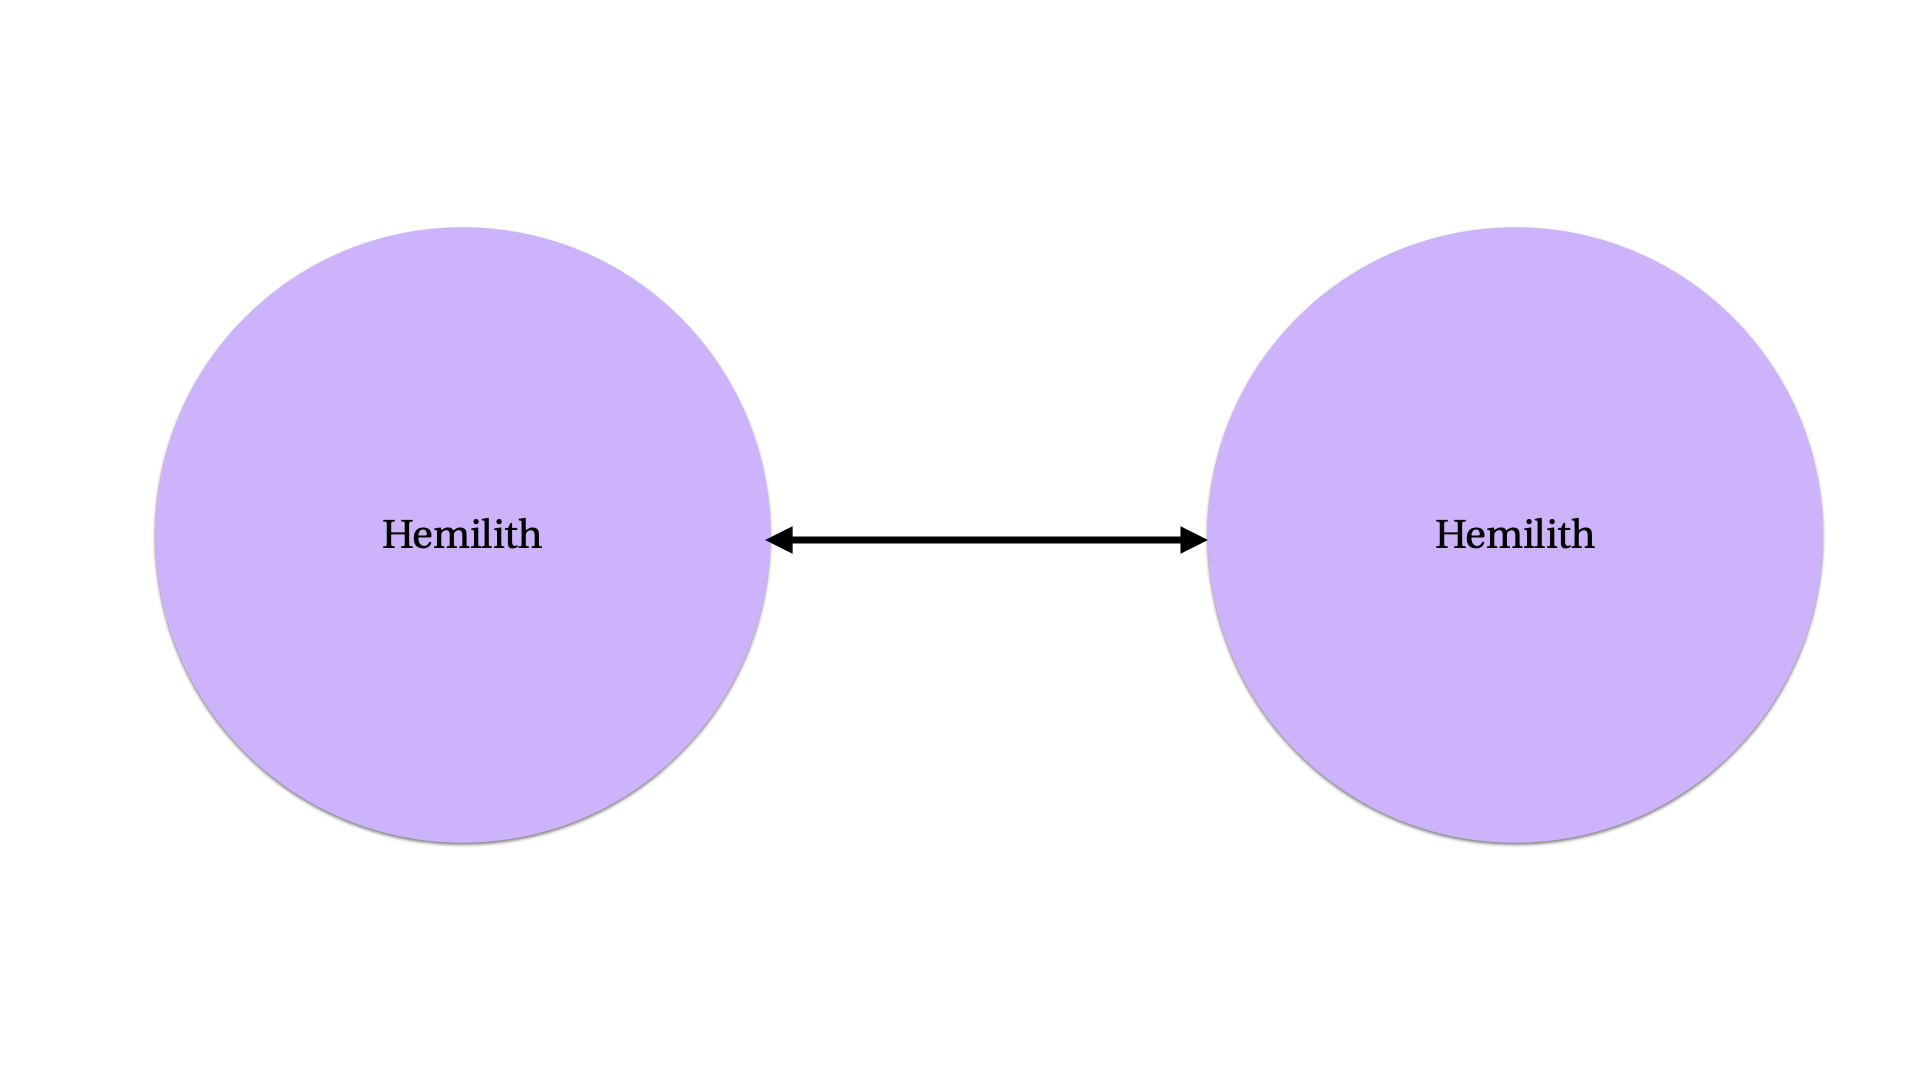 two circles with the word “hemilith” on them and a double-headed arrow
between them